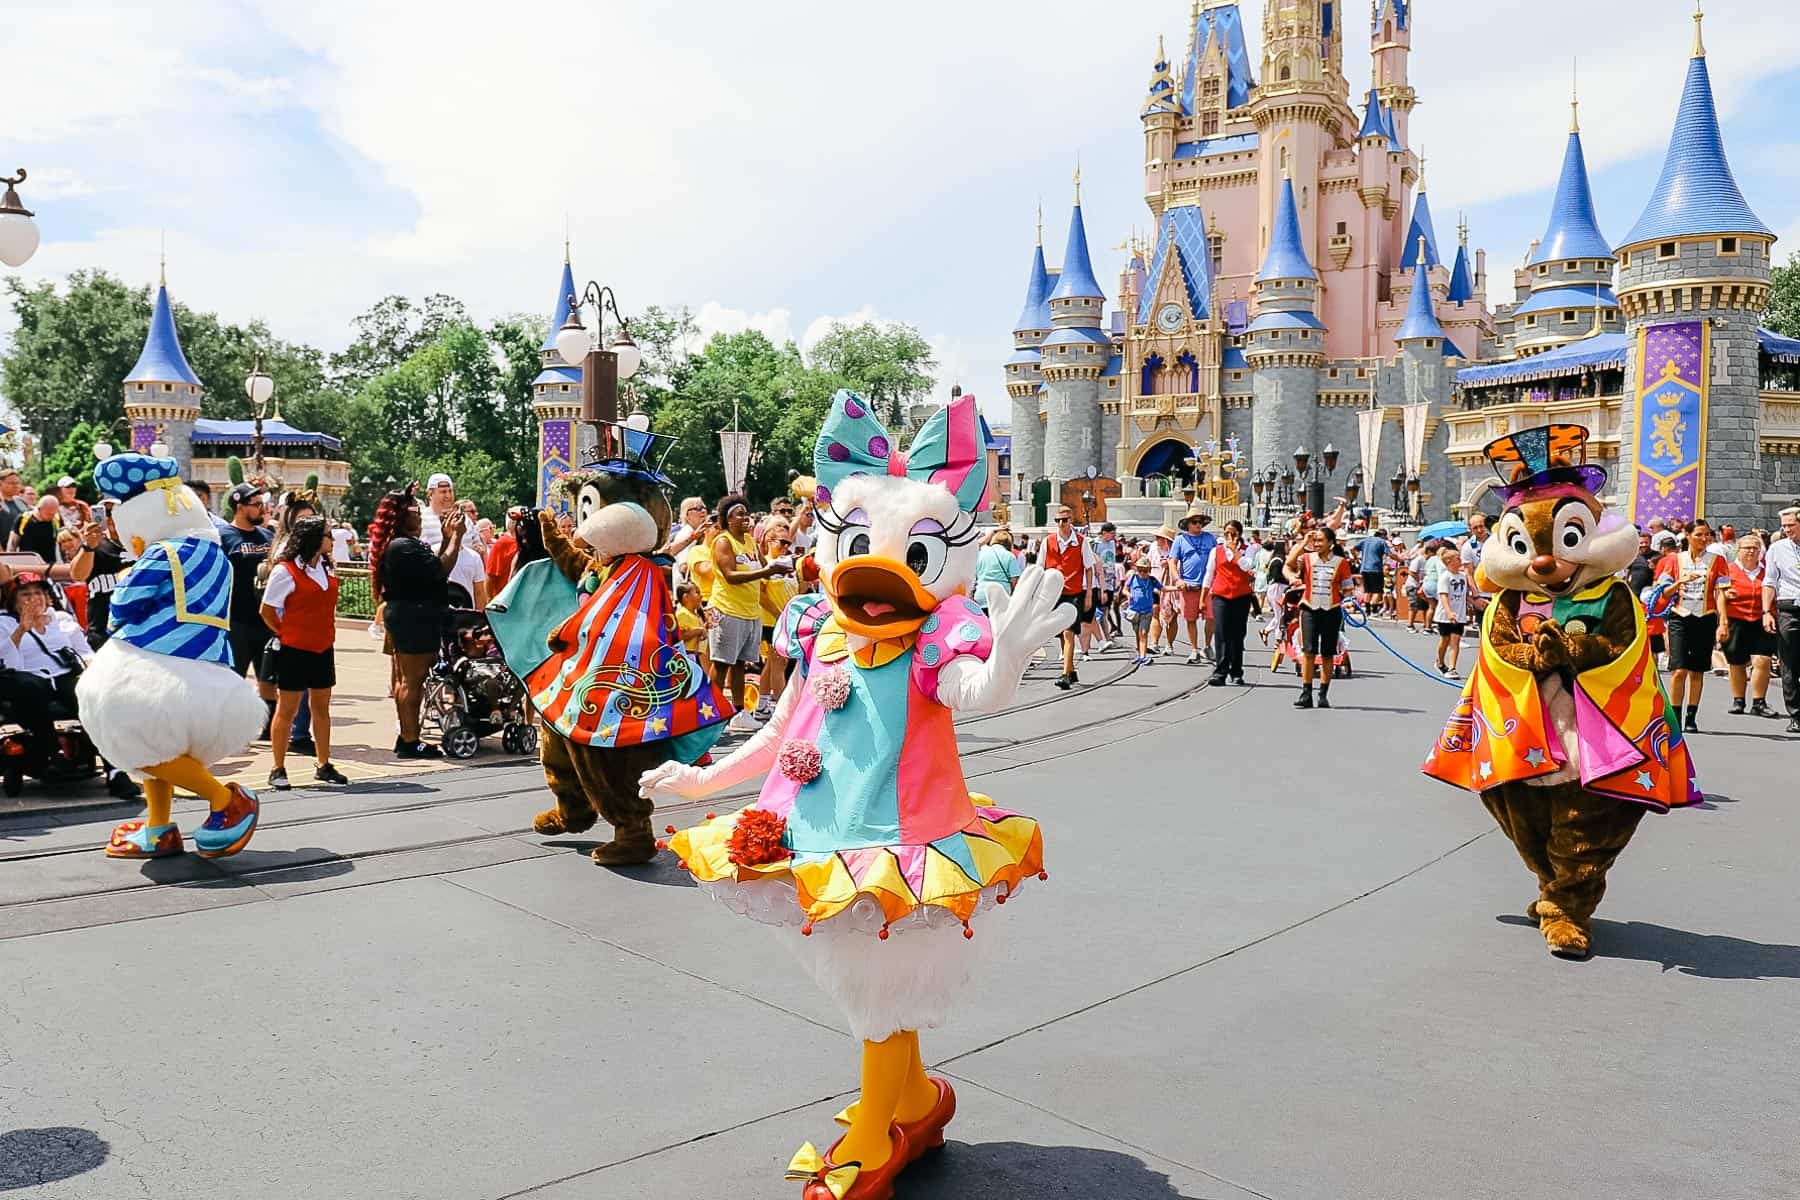 End character in the parade including Chip and Dale with capes and top hats. 